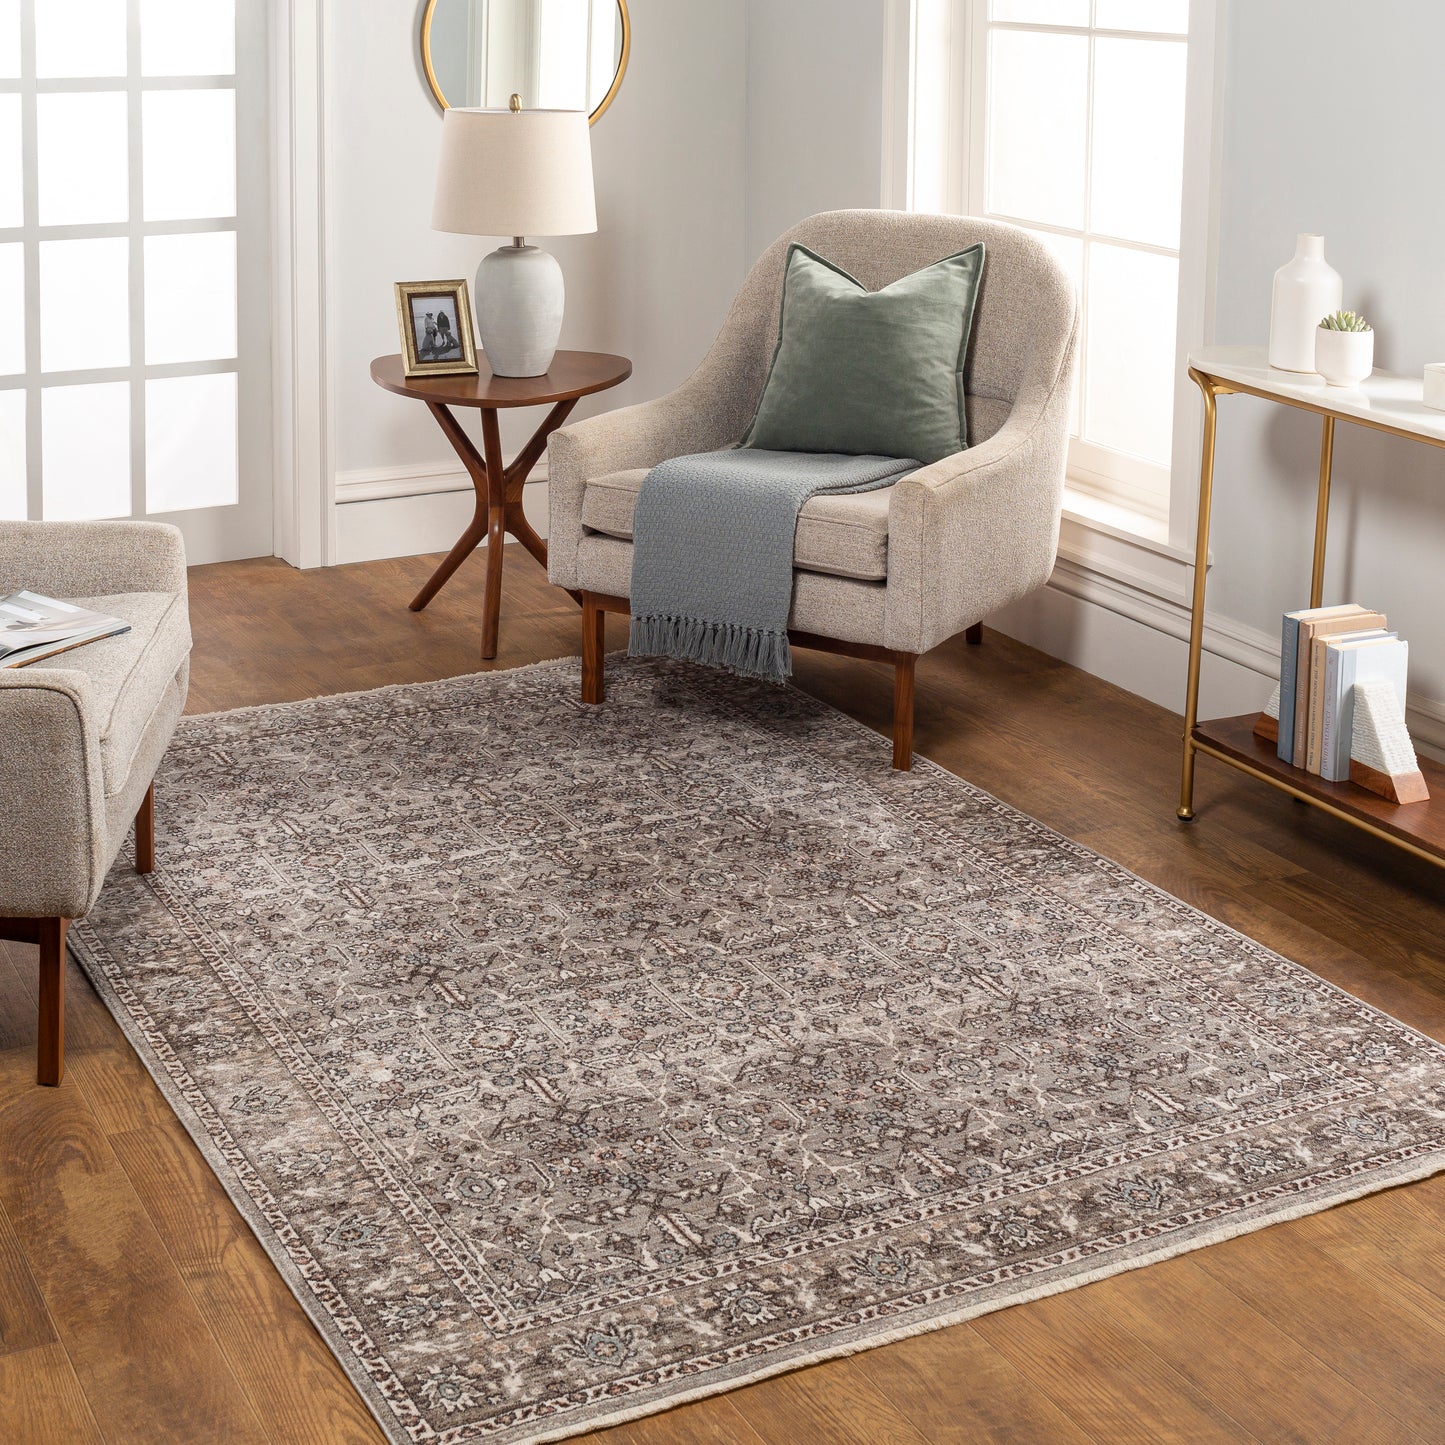 Carlisle 30757 Machine Woven Synthetic Blend Indoor Area Rug by Surya Rugs